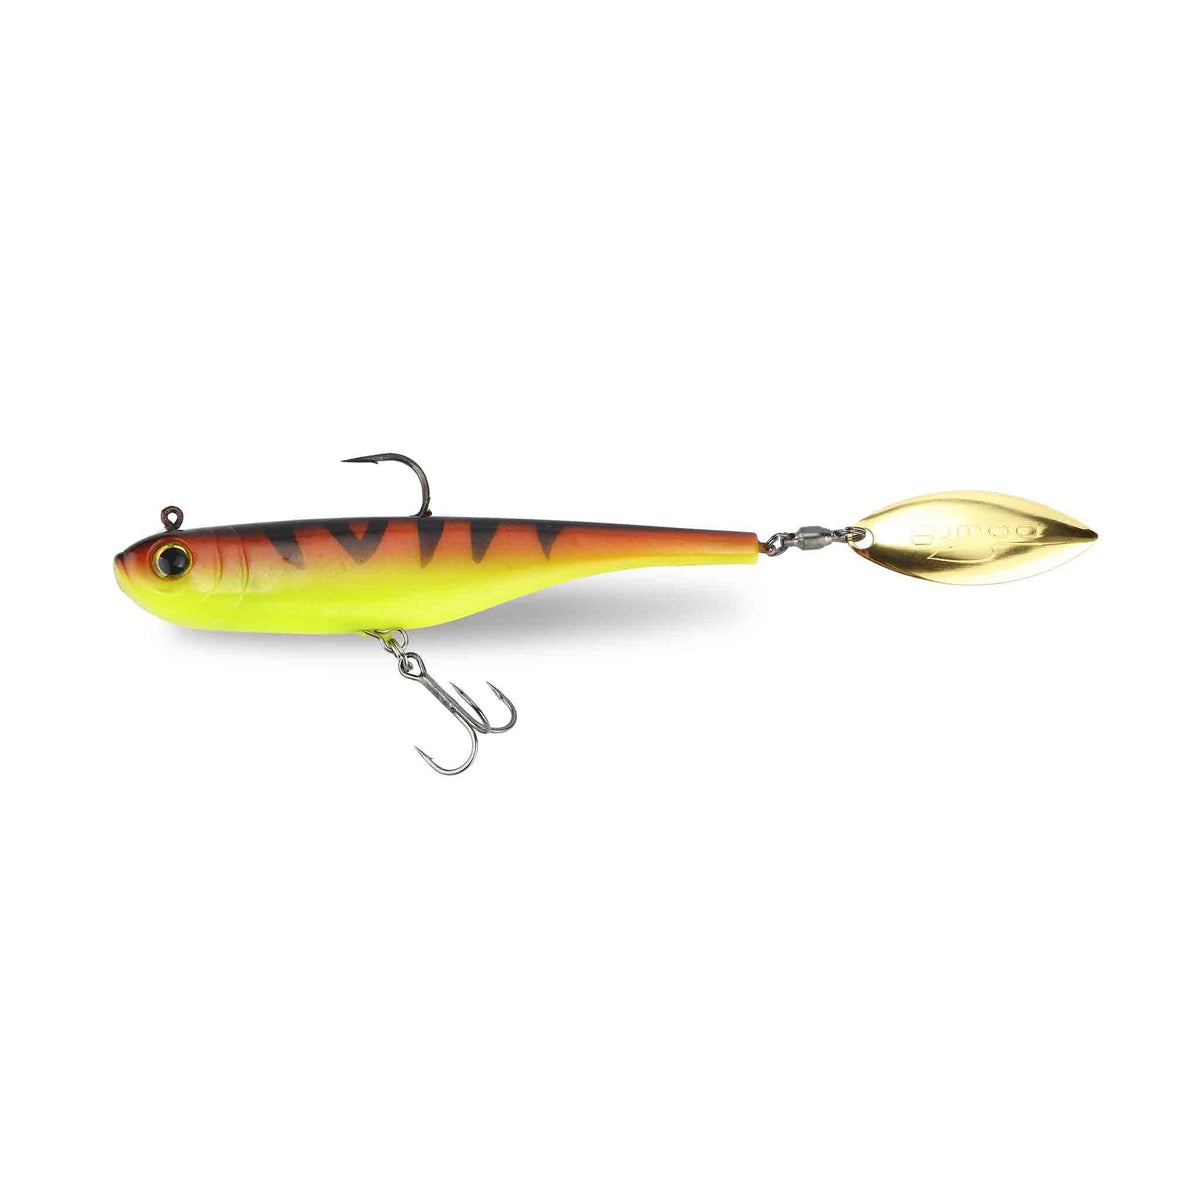 View of Swimbaits Biwaa Divinator 55g Tailspin Swimbait Red Tiger available at EZOKO Pike and Musky Shop